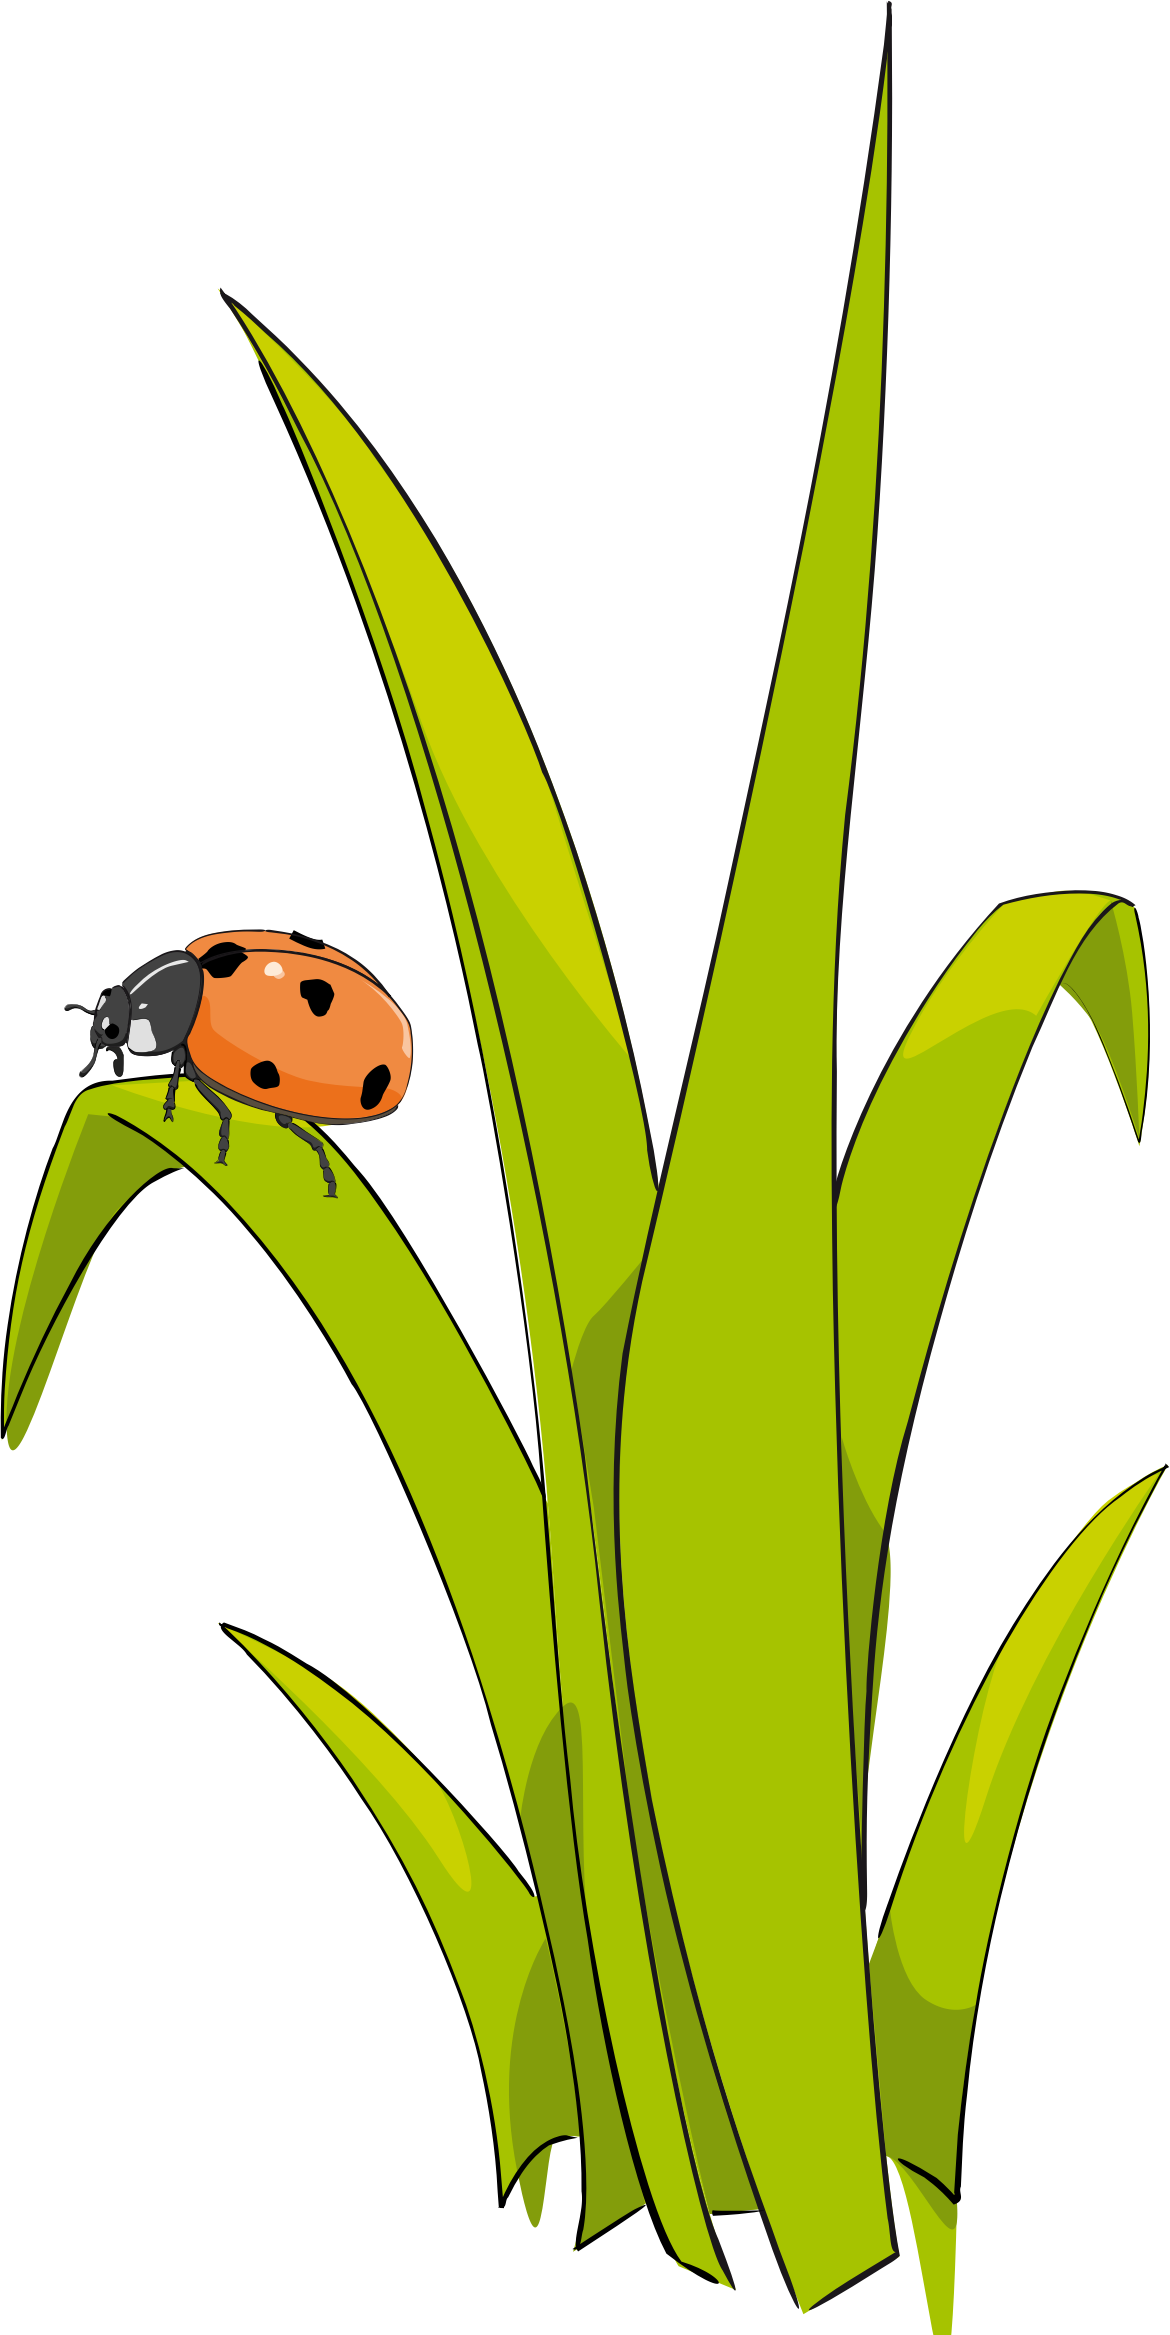 Blade of grass clipart - Clipground